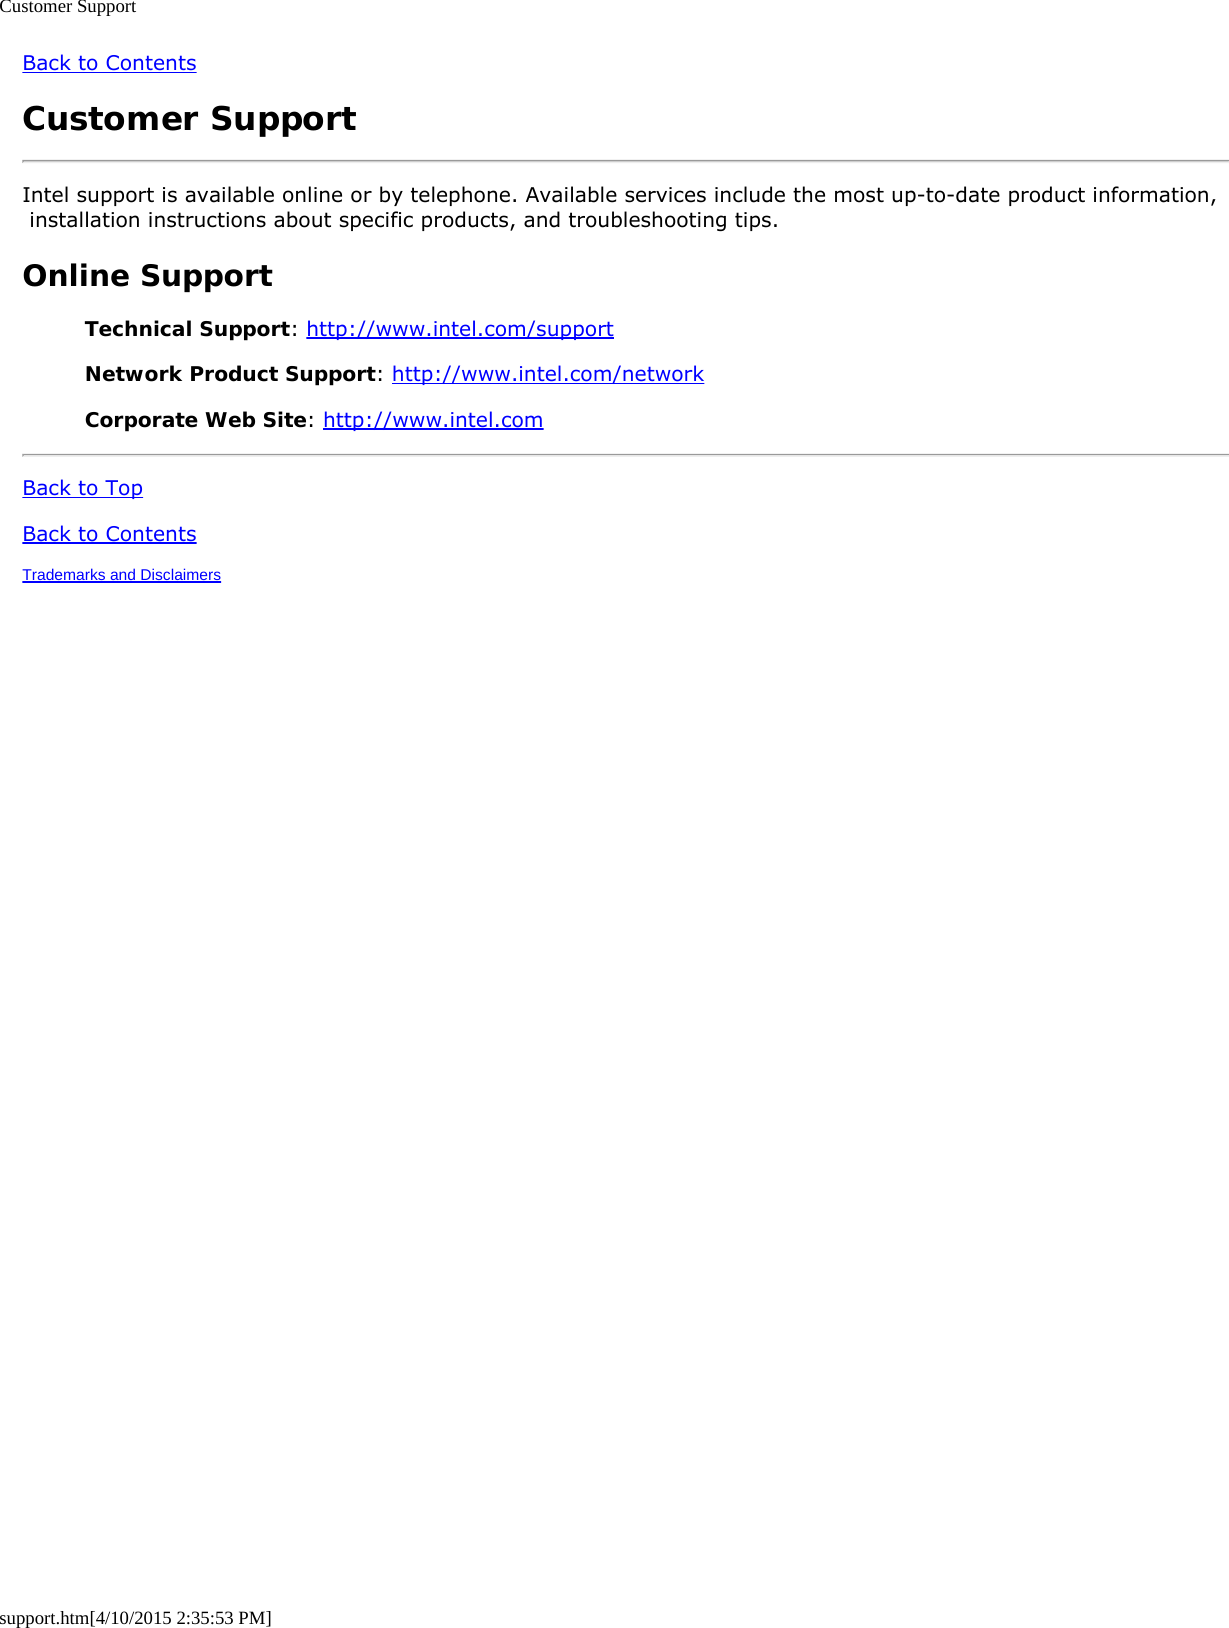 Customer Supportsupport.htm[4/10/2015 2:35:53 PM]Back to ContentsCustomer SupportIntel support is available online or by telephone. Available services include the most up-to-date product information, installation instructions about specific products, and troubleshooting tips.Online SupportTechnical Support: http://www.intel.com/supportNetwork Product Support: http://www.intel.com/networkCorporate Web Site: http://www.intel.comBack to TopBack to ContentsTrademarks and Disclaimers